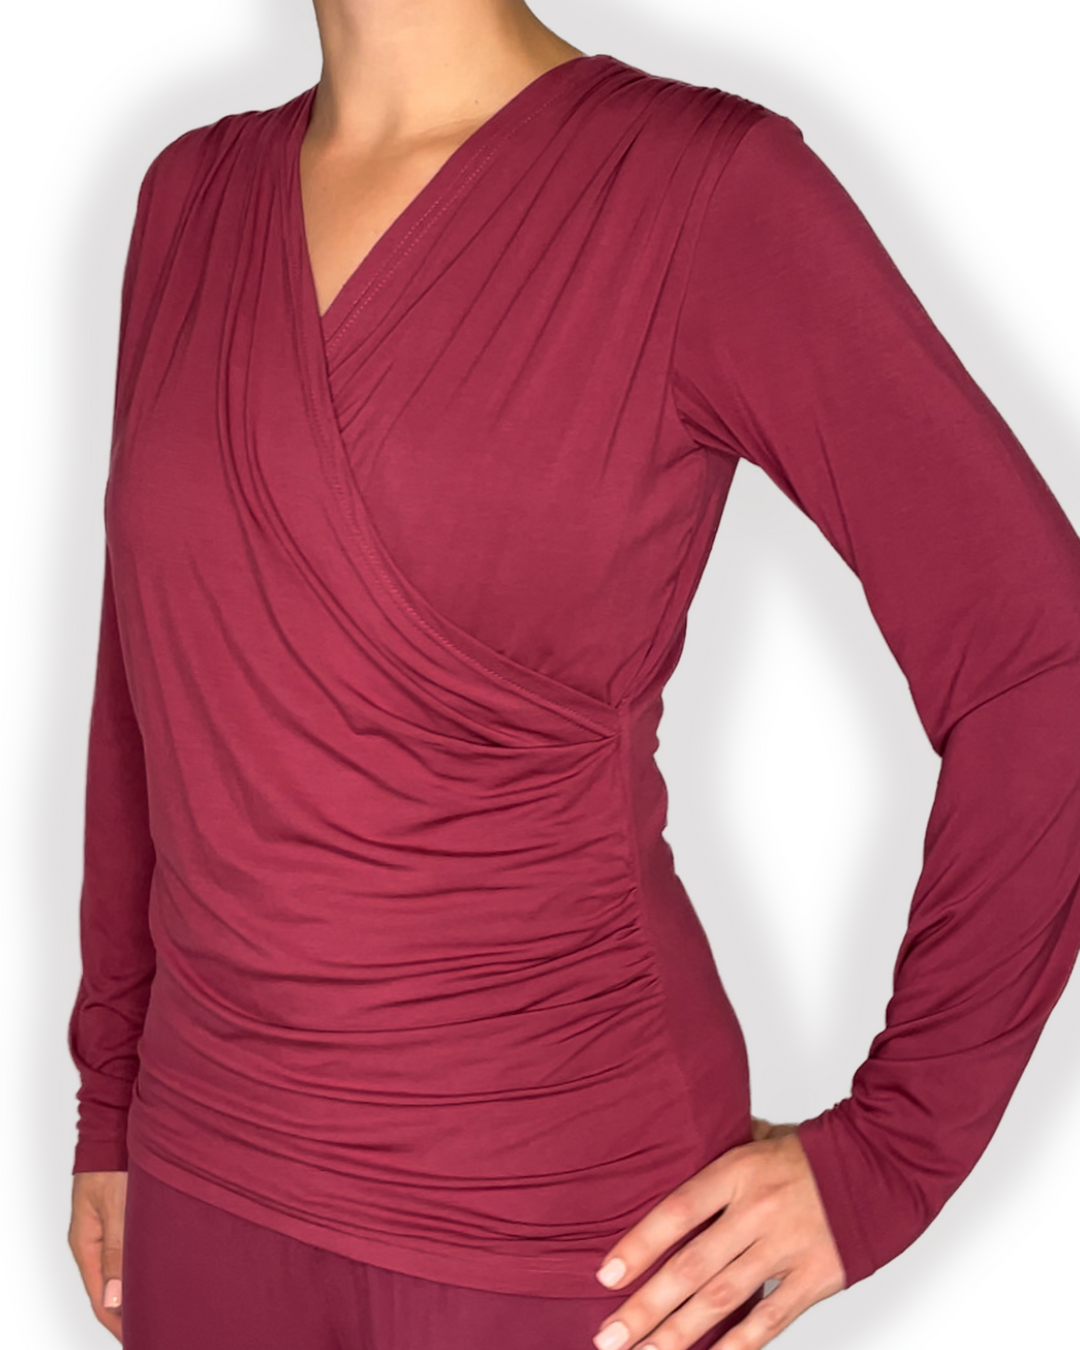 jia and kate ROSIE Braless Bamboo Wrap Top Long Sleeve in berry red color side view